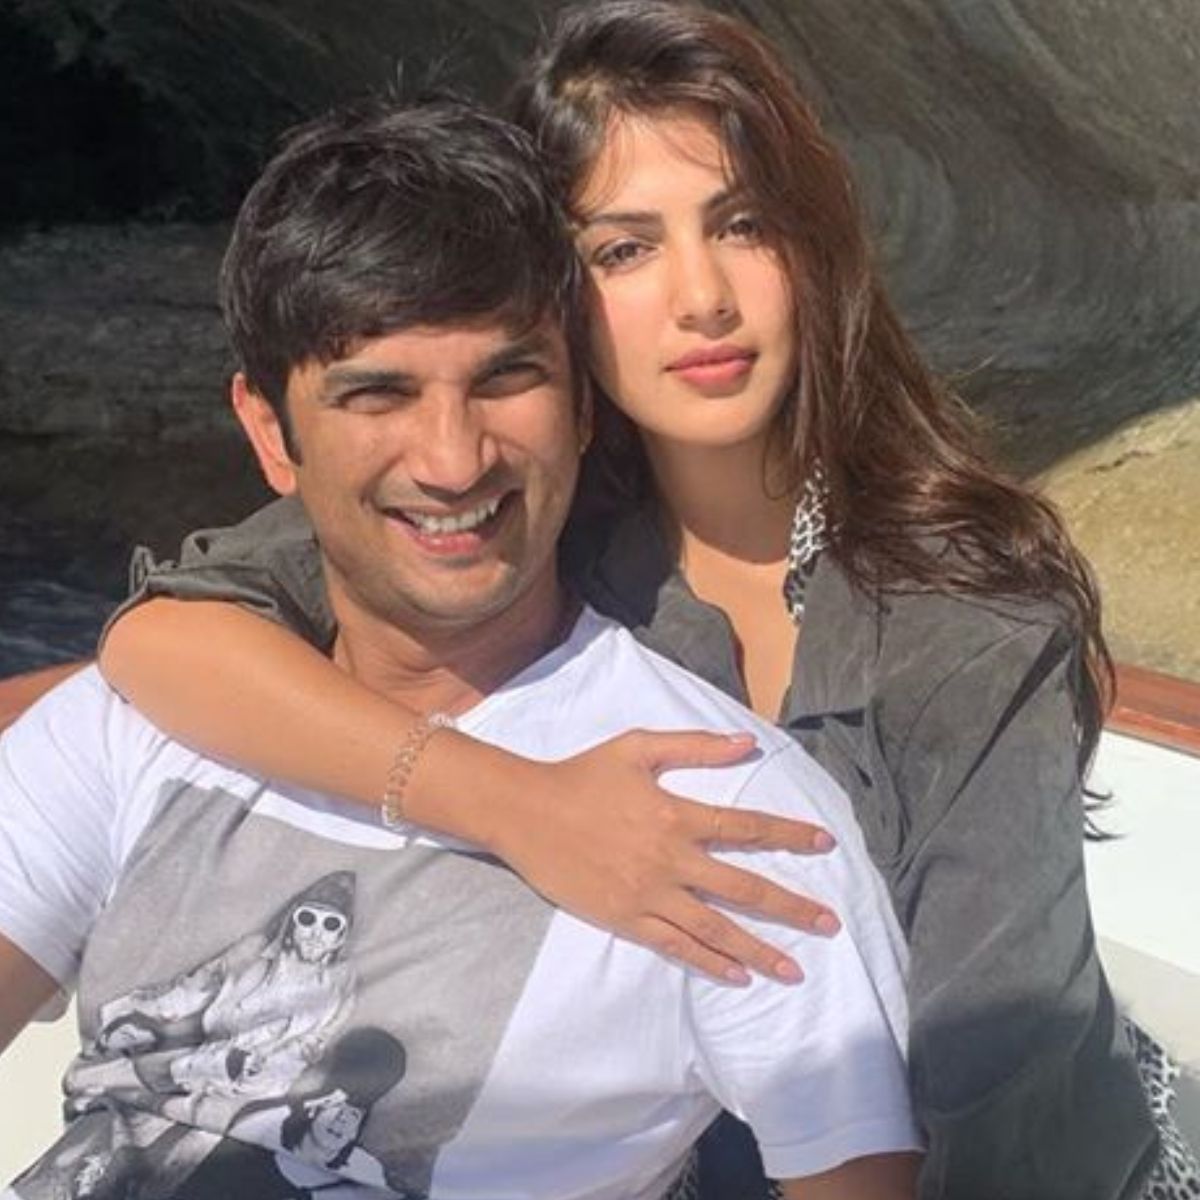 Sushant Singh Rajput’s Demise: Rhea Chakraborty Reveals She Had Informed Actor's Sister About His Condition Before Leaving In 11 Hour Interrogation